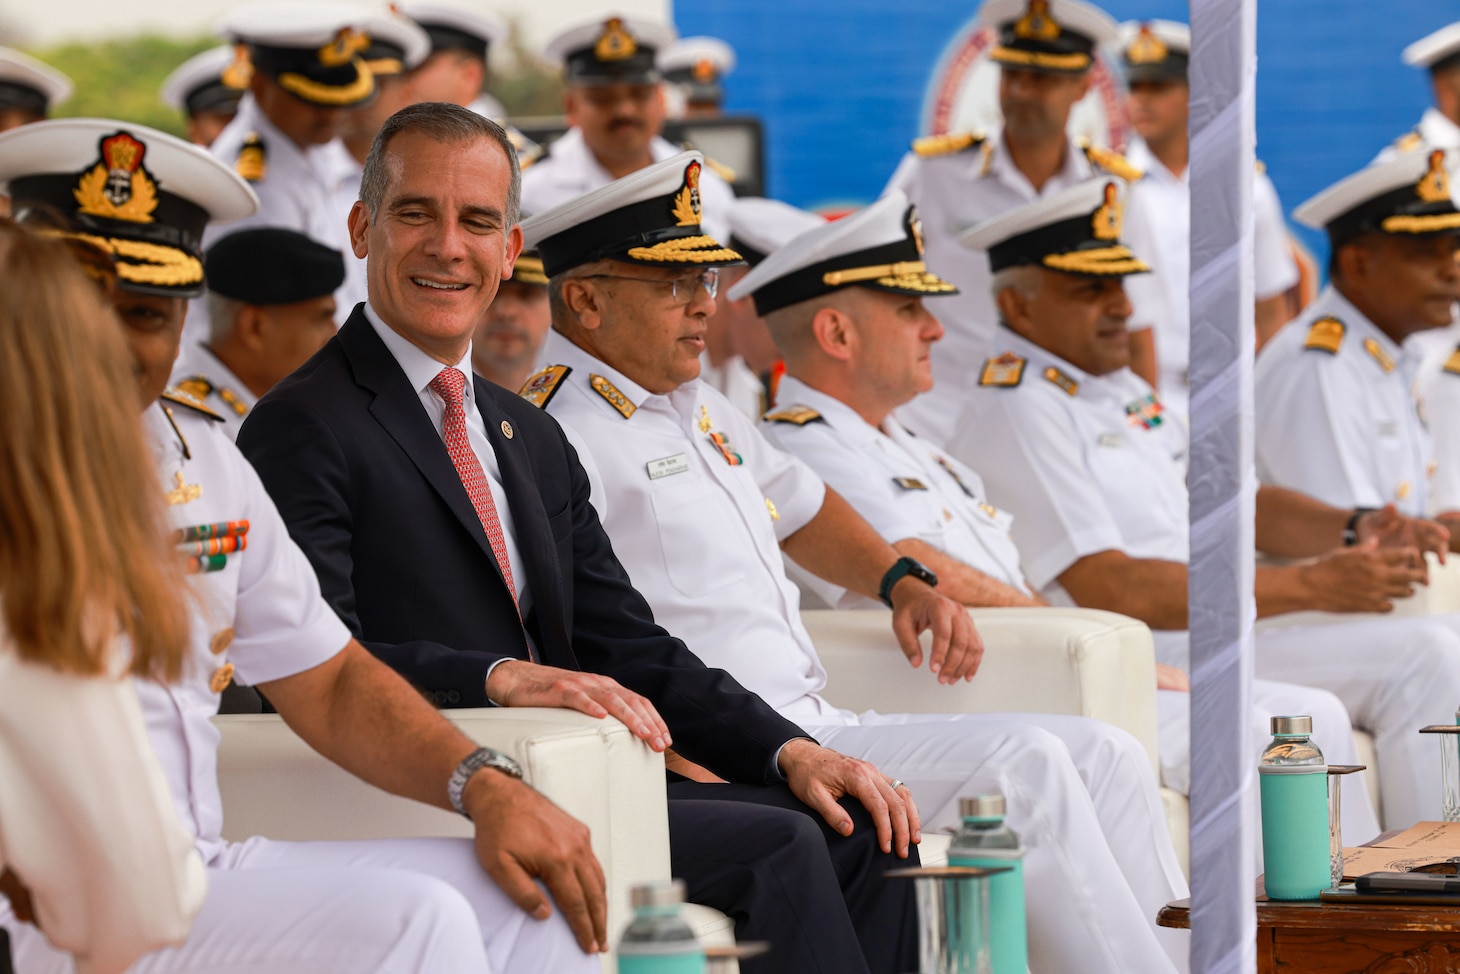 U.S. Ambassador to the Republic of India, Eric Garcetti, makes introduction with other distinguished visitors at the opening ceremony of Exercise Tiger TRIUMPH in Visakhapatnam, India, March 19, 2024. Tiger TRIUMPH, which stands for Tri-Services India U.S. Amphibious Exercise, is a U.S.-India exercise focused on humanitarian assistance and disaster relief readiness to improve bilateral compatibility and interoperability between U.S. and Indian Armed Forces and enhance bilateral, joint, and services readiness in the Indian Ocean region. (U.S. Marine Corps photo by Cpl. Aidan Hekker)